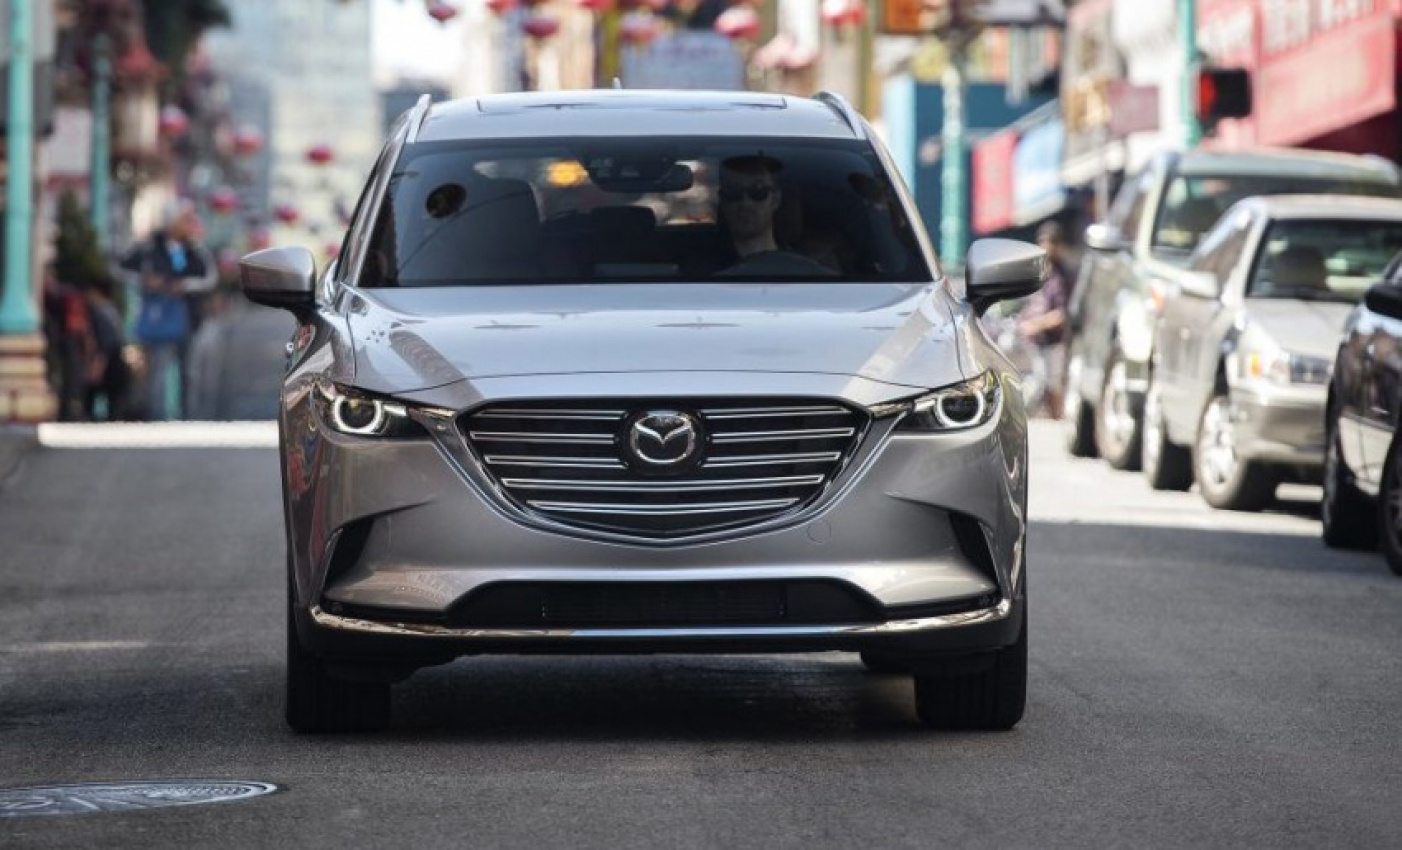 autos, cars, mazda, autos mazda, mazda to make all models hybrid, electric by early 2030s, says kyodo